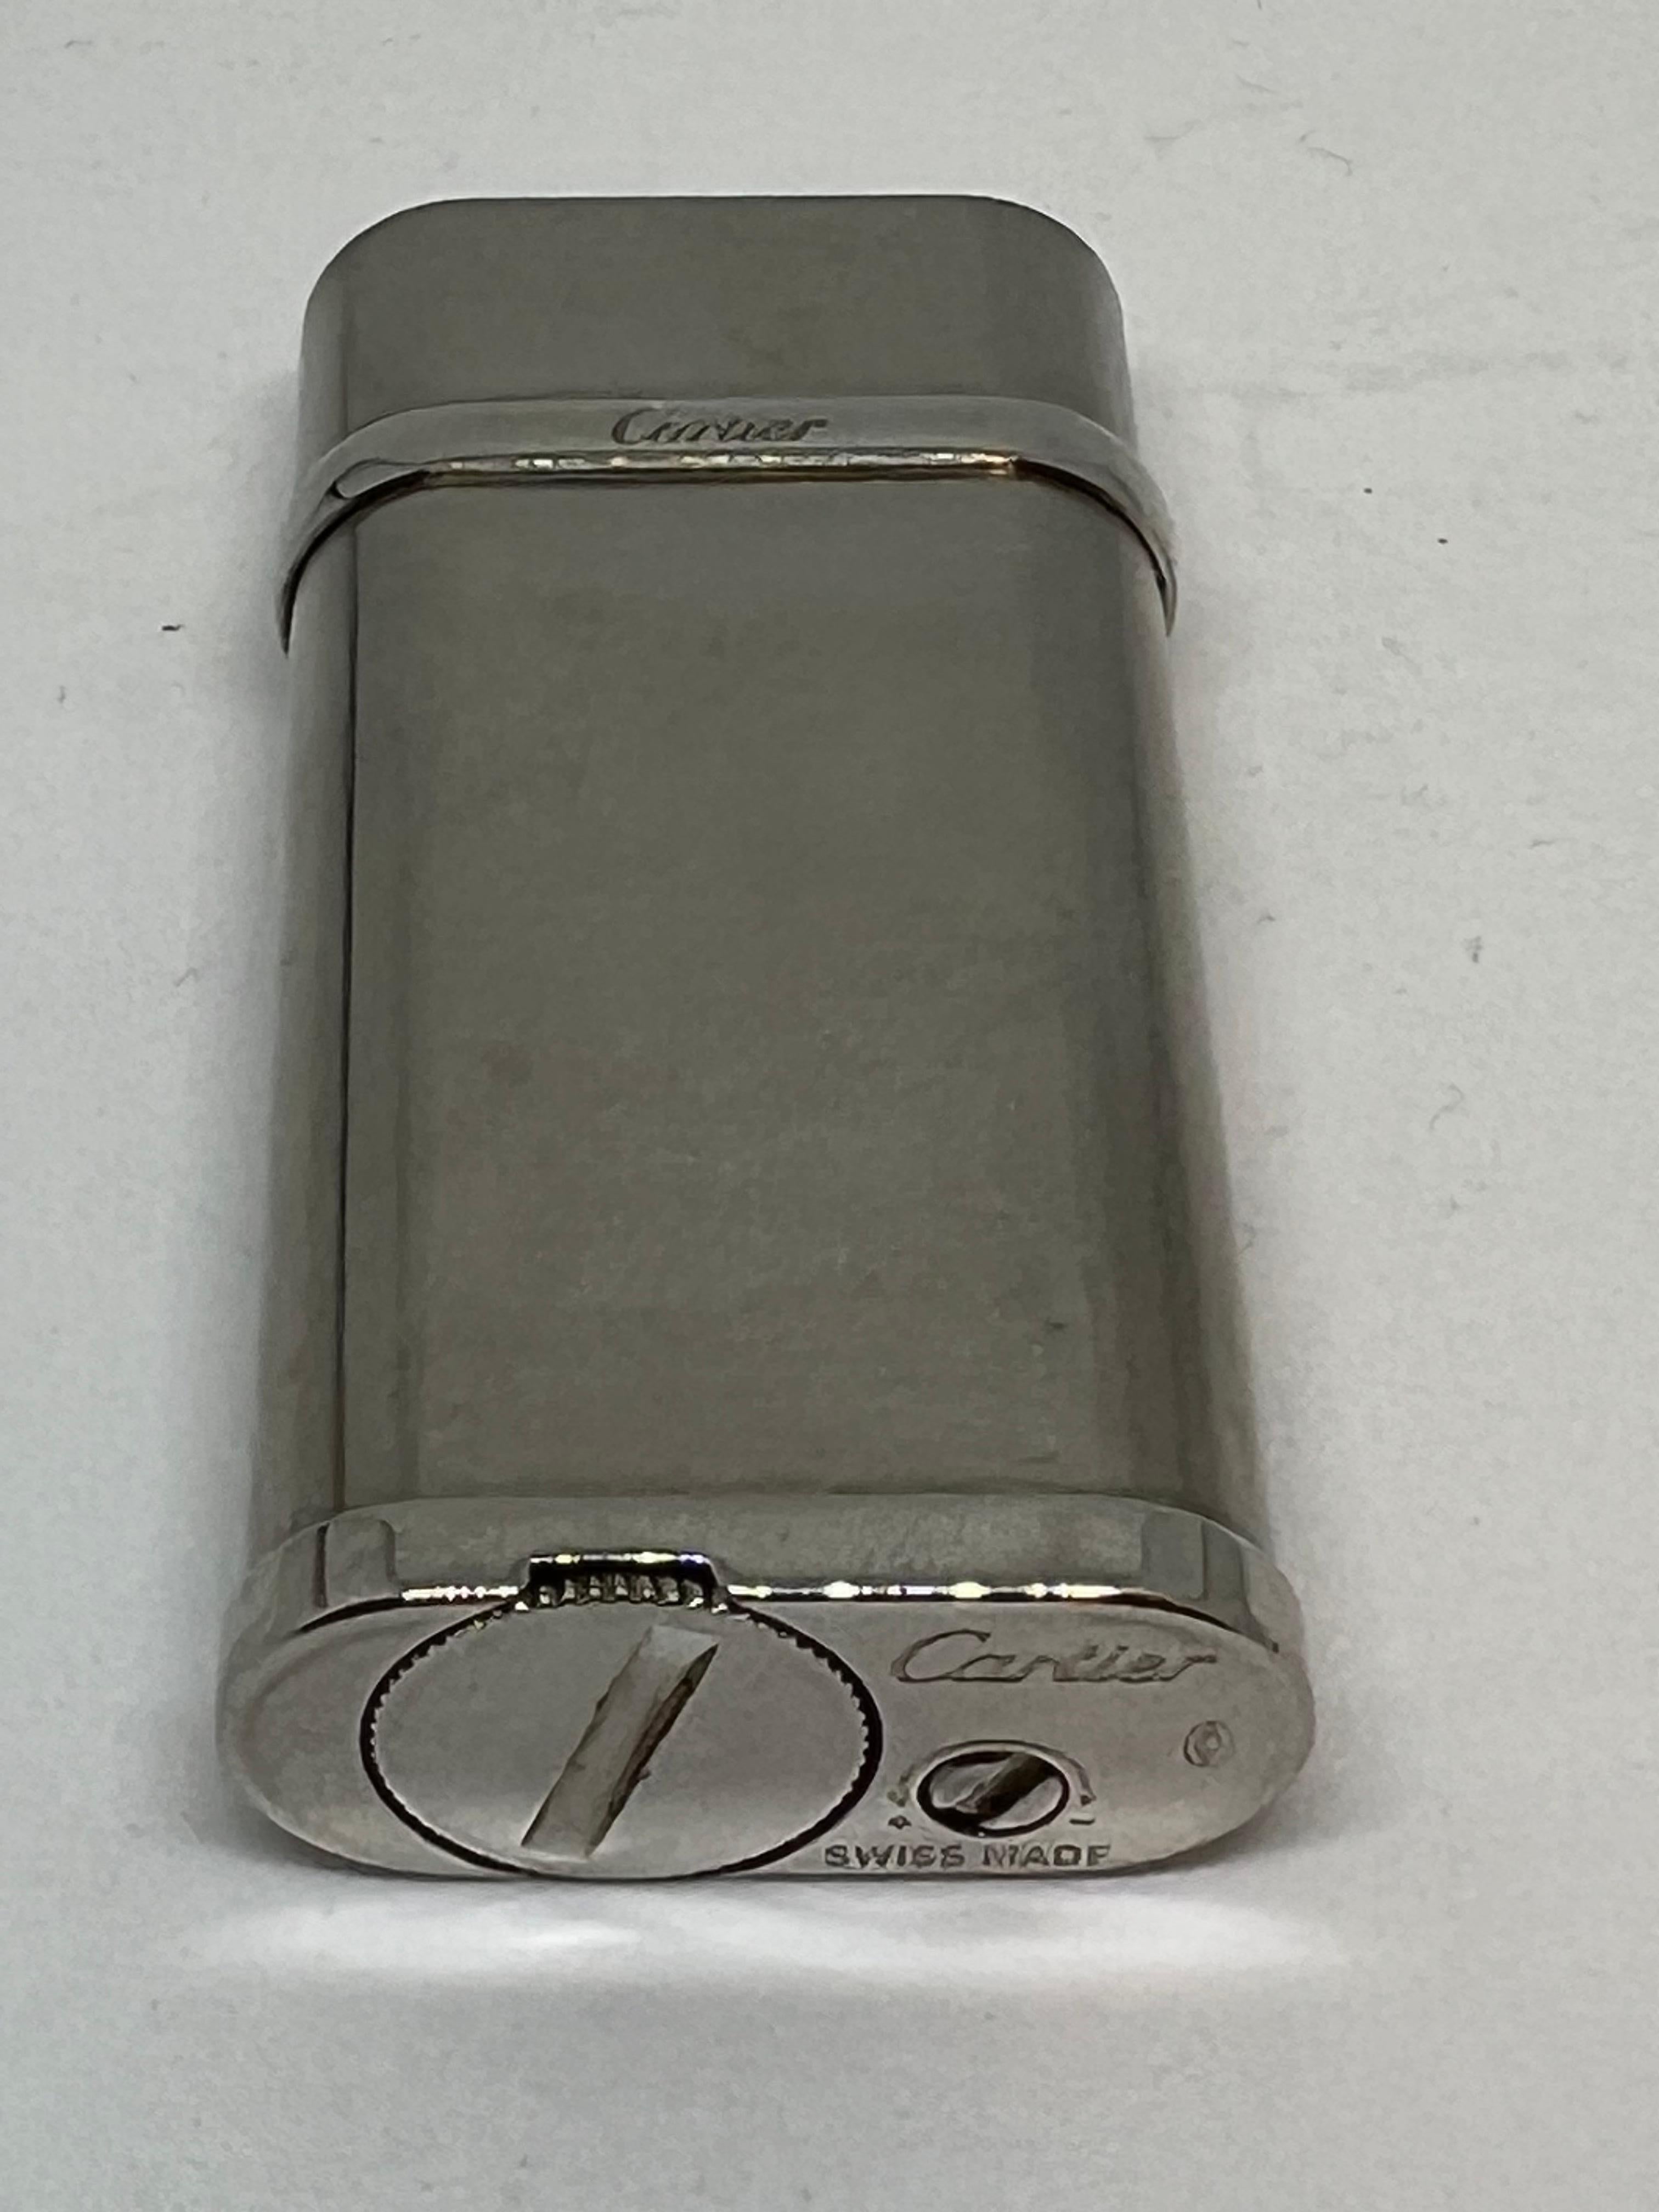 Retro Silver and Platinum finish Cartier lighter 
The lighter comes in its original Cartier box with papers and certificate
In mint working condition, the lighter sparks, ignites and flames 
It’s even has it outsize Cartier cover box 
Circa 1980s